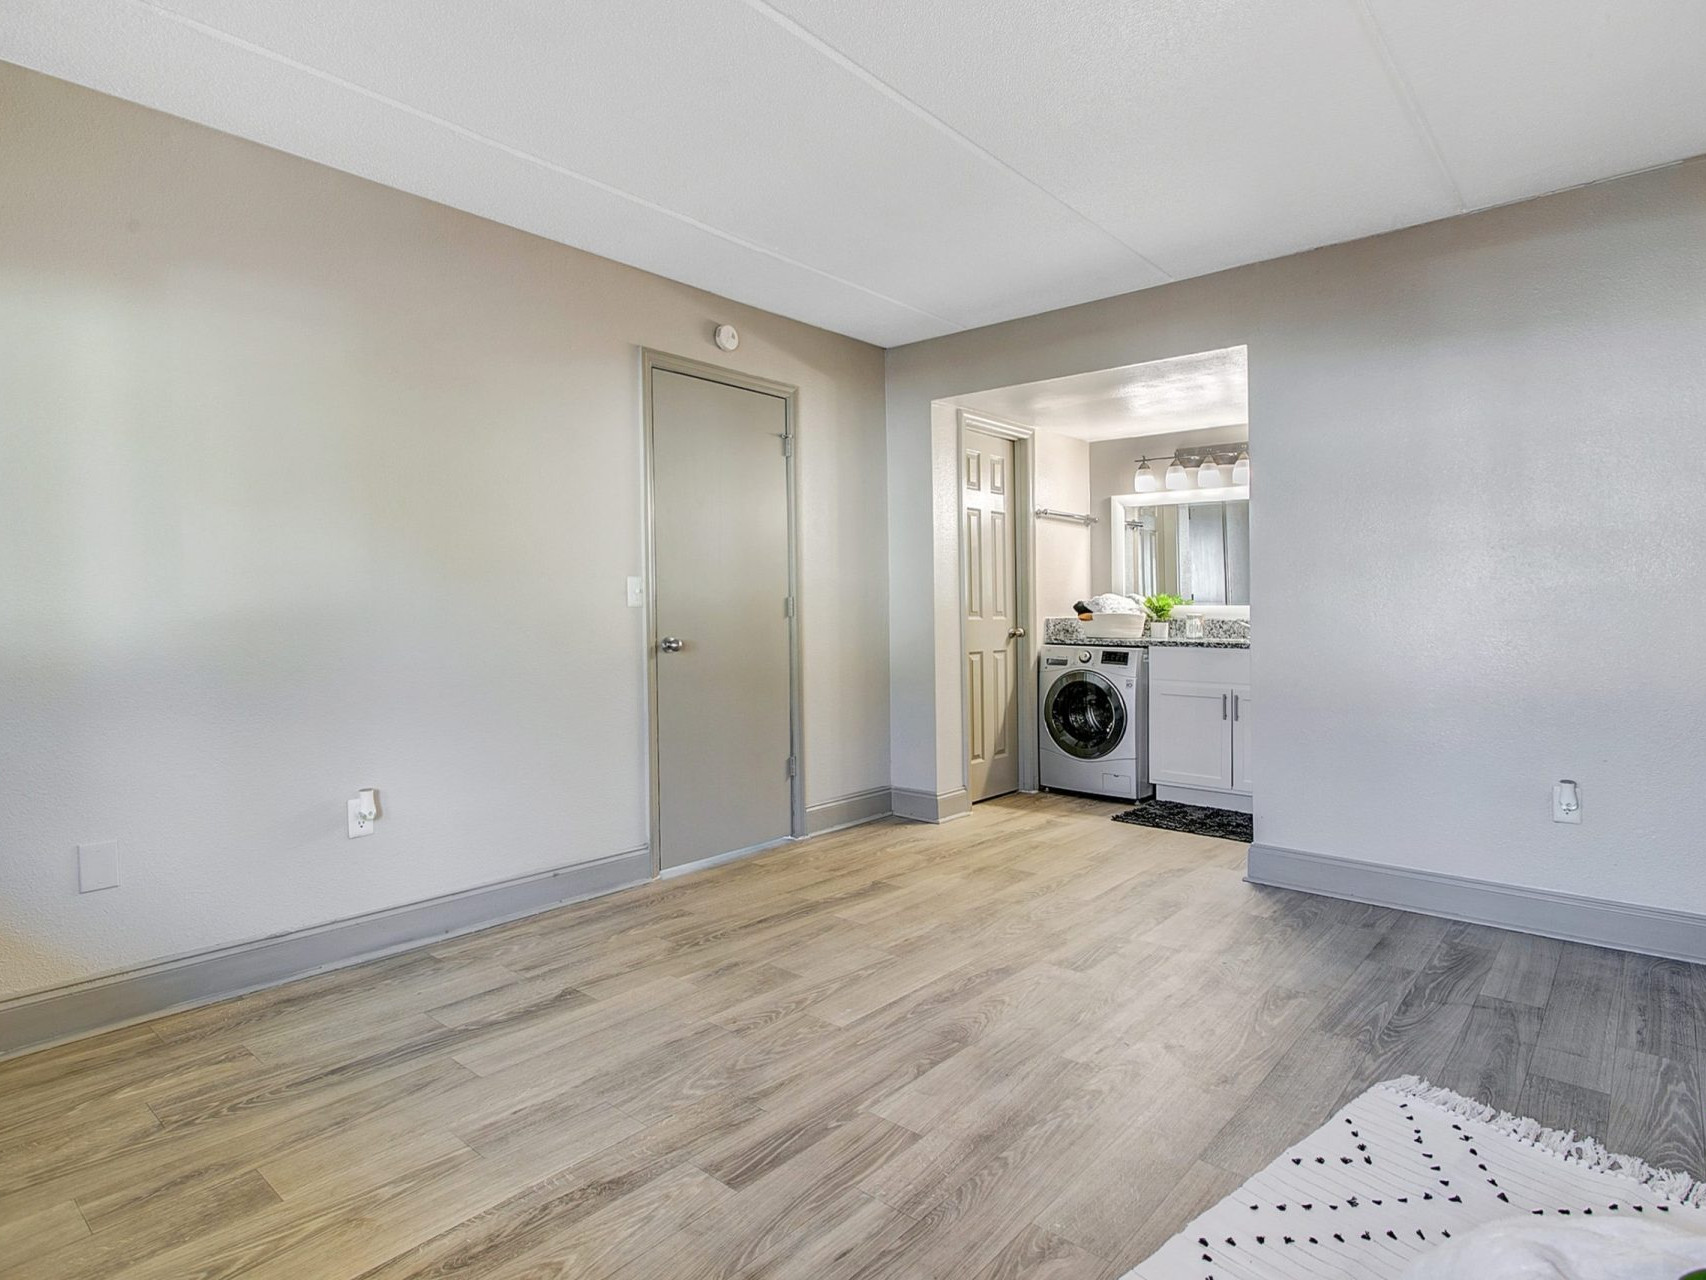 A living room with hardwood-style flooring, an entryway, and a laundry area with a washer/dryer.